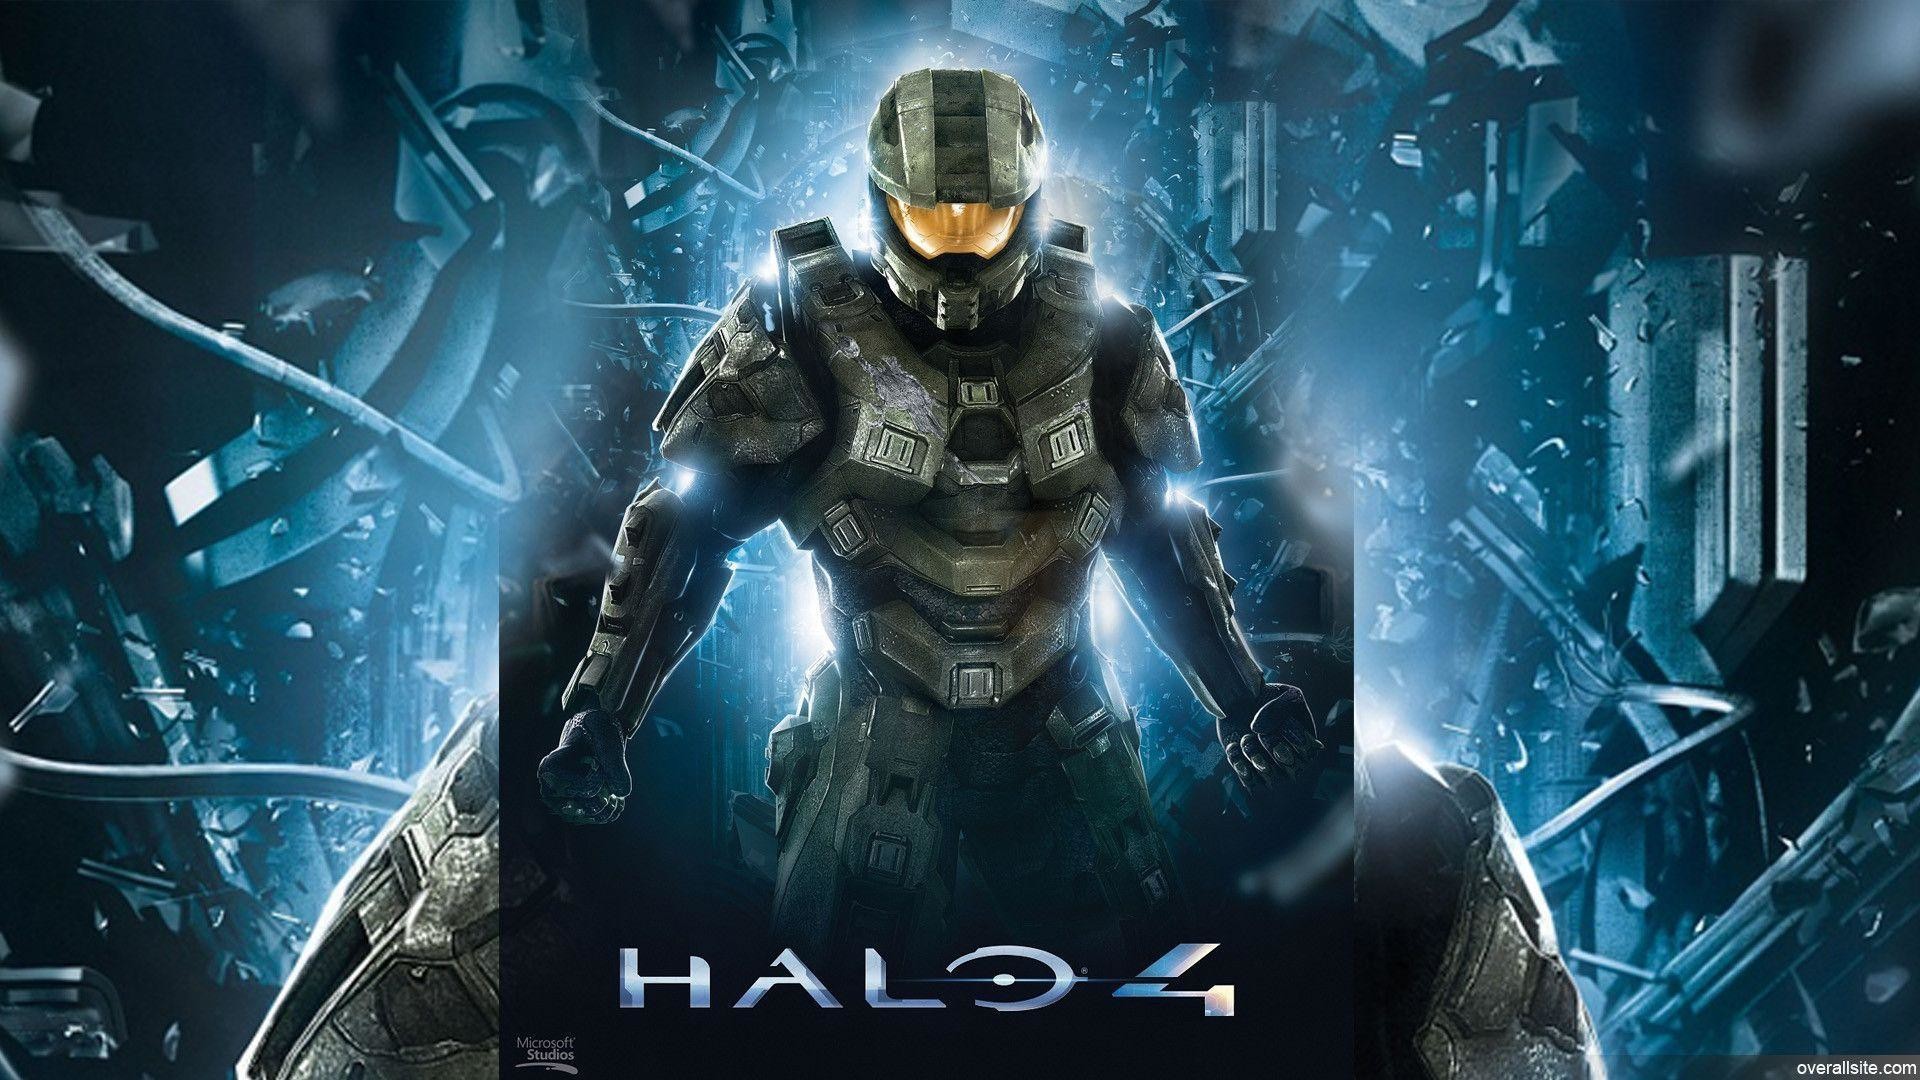 1920x1080 Cool Halo Wallpapers Overallsite Scuta Gaming PX .